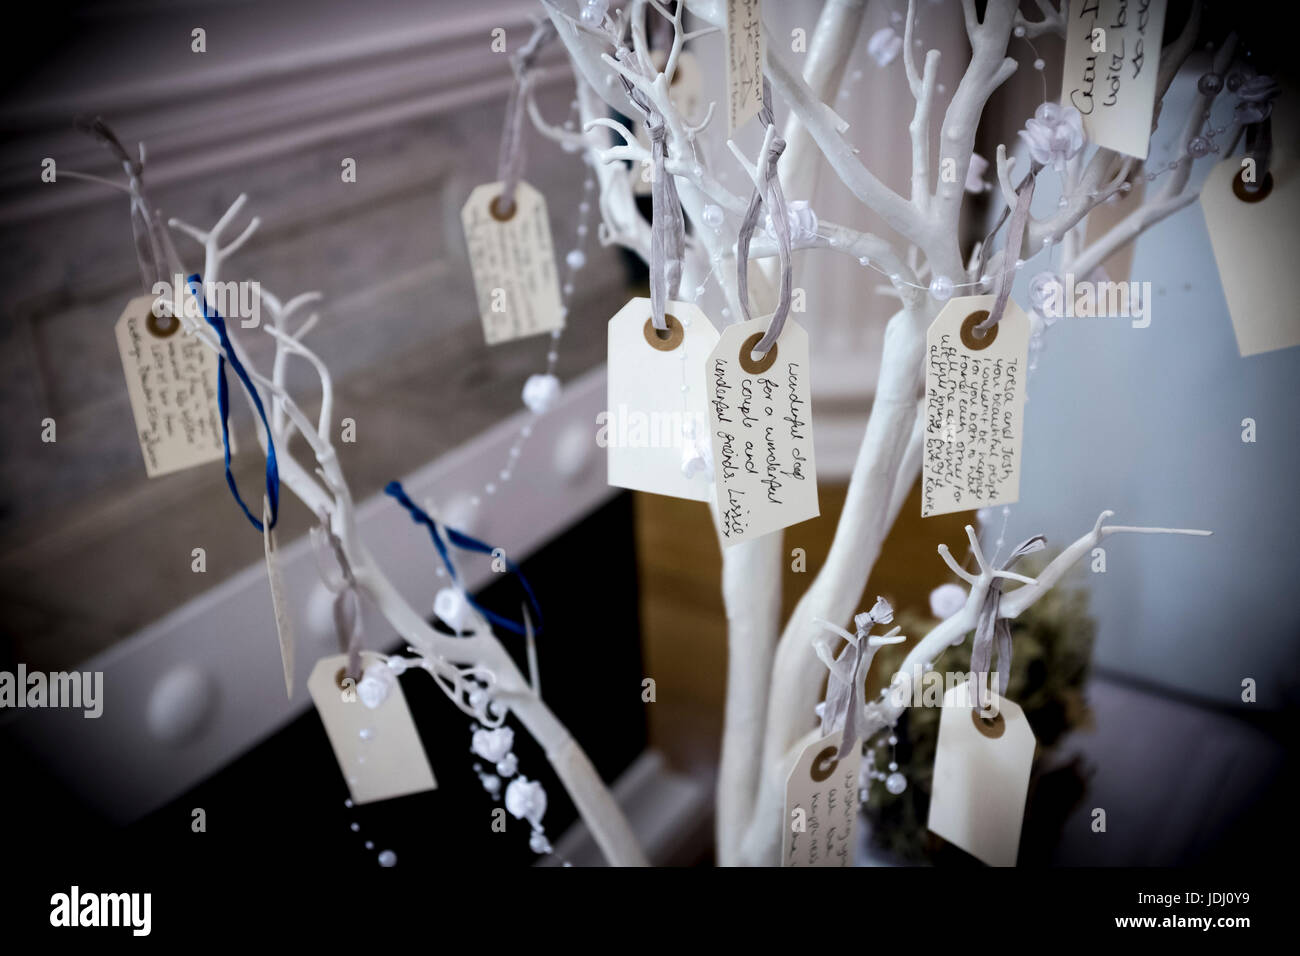 Decorative small tree branches with guests' personal congratulation and wishes messages to a newly wed couple at a wedding reception, UK Stock Photo